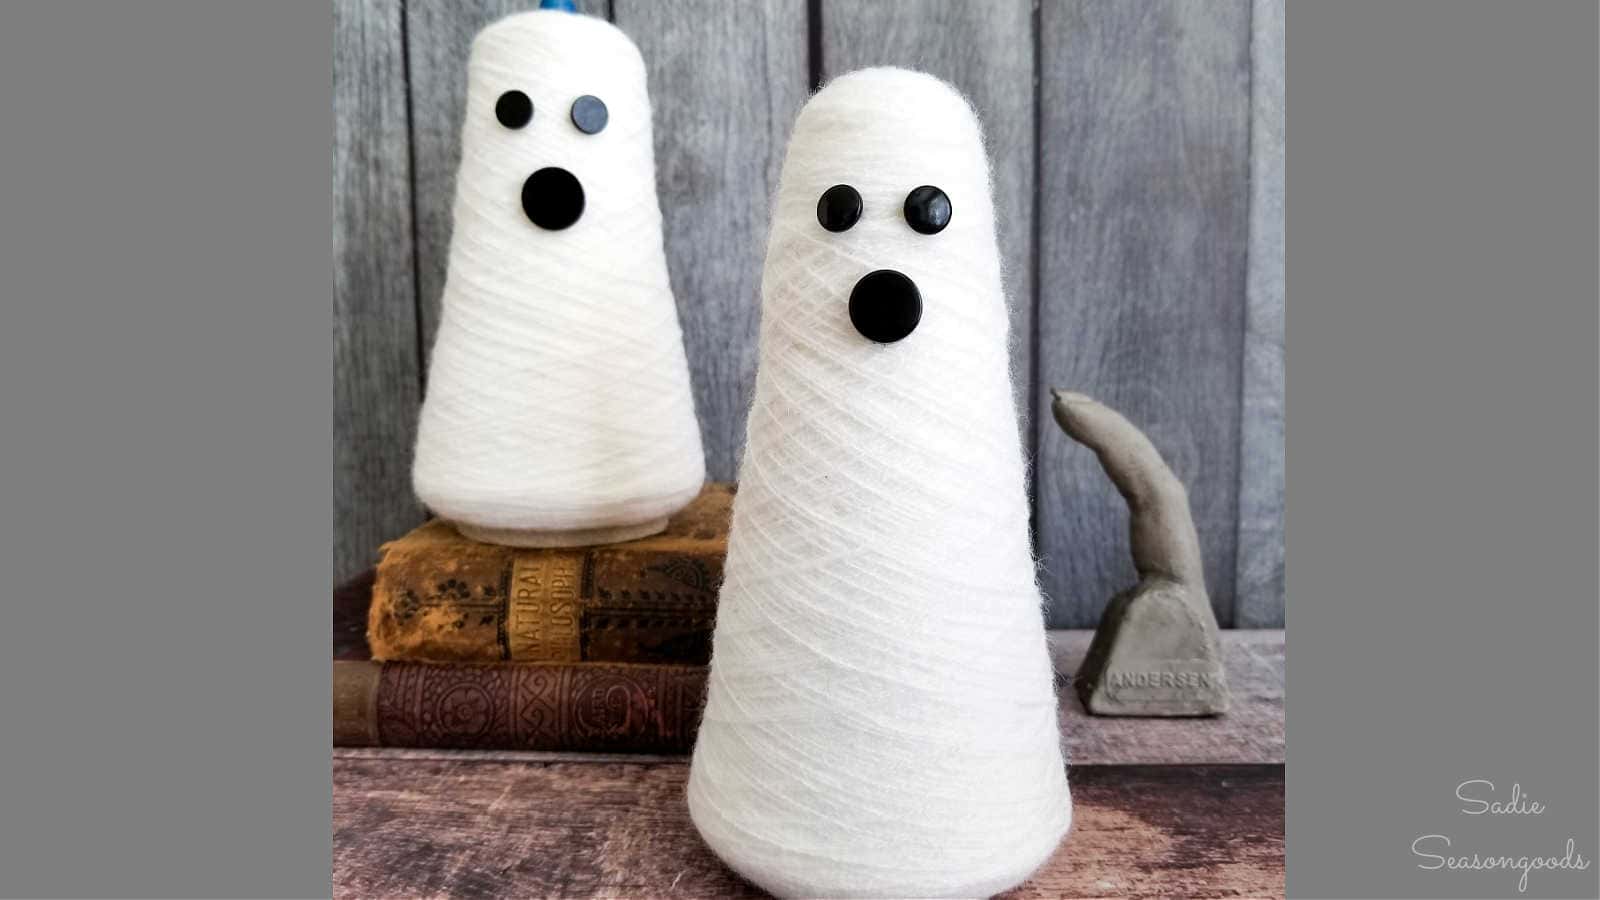 cone spools as ghost decorations